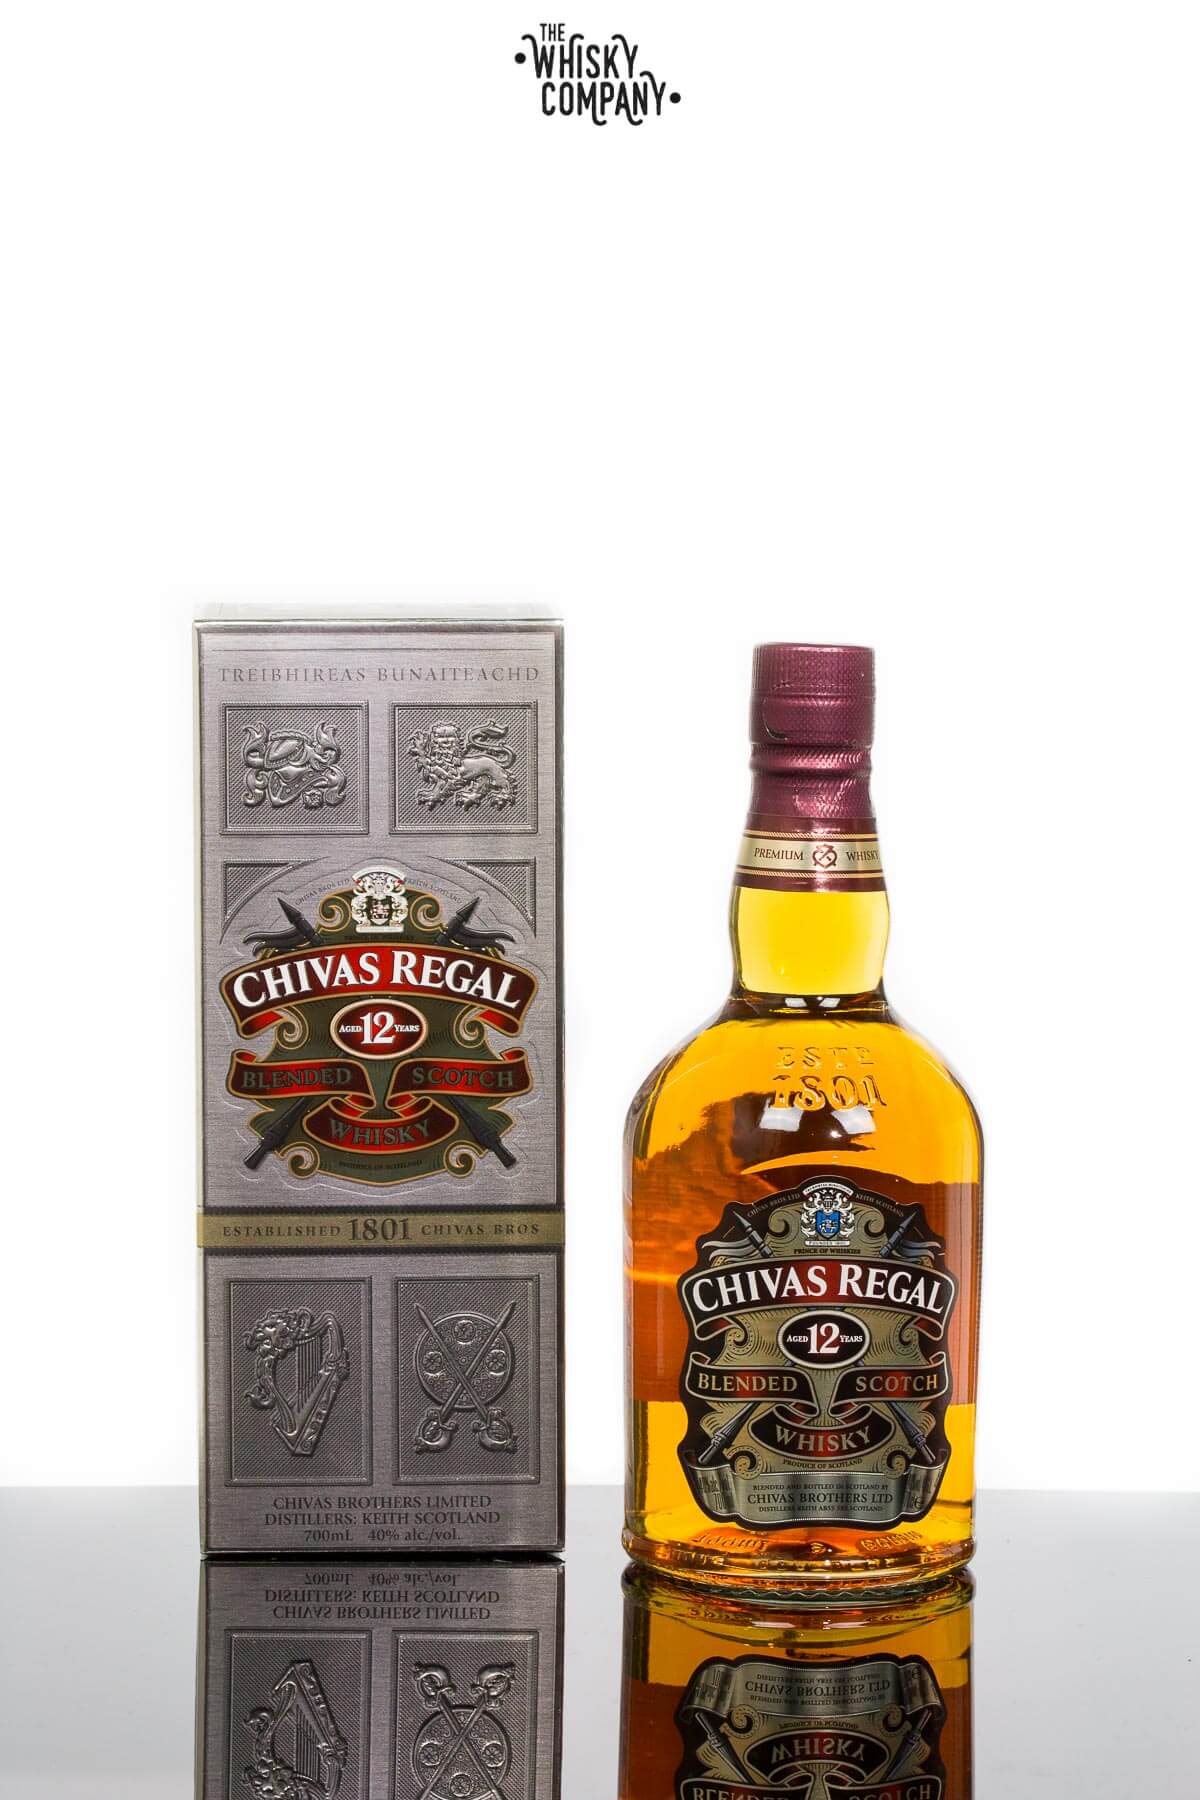 Chivas Regal Aged 12 Years Blended Scotch Whisky